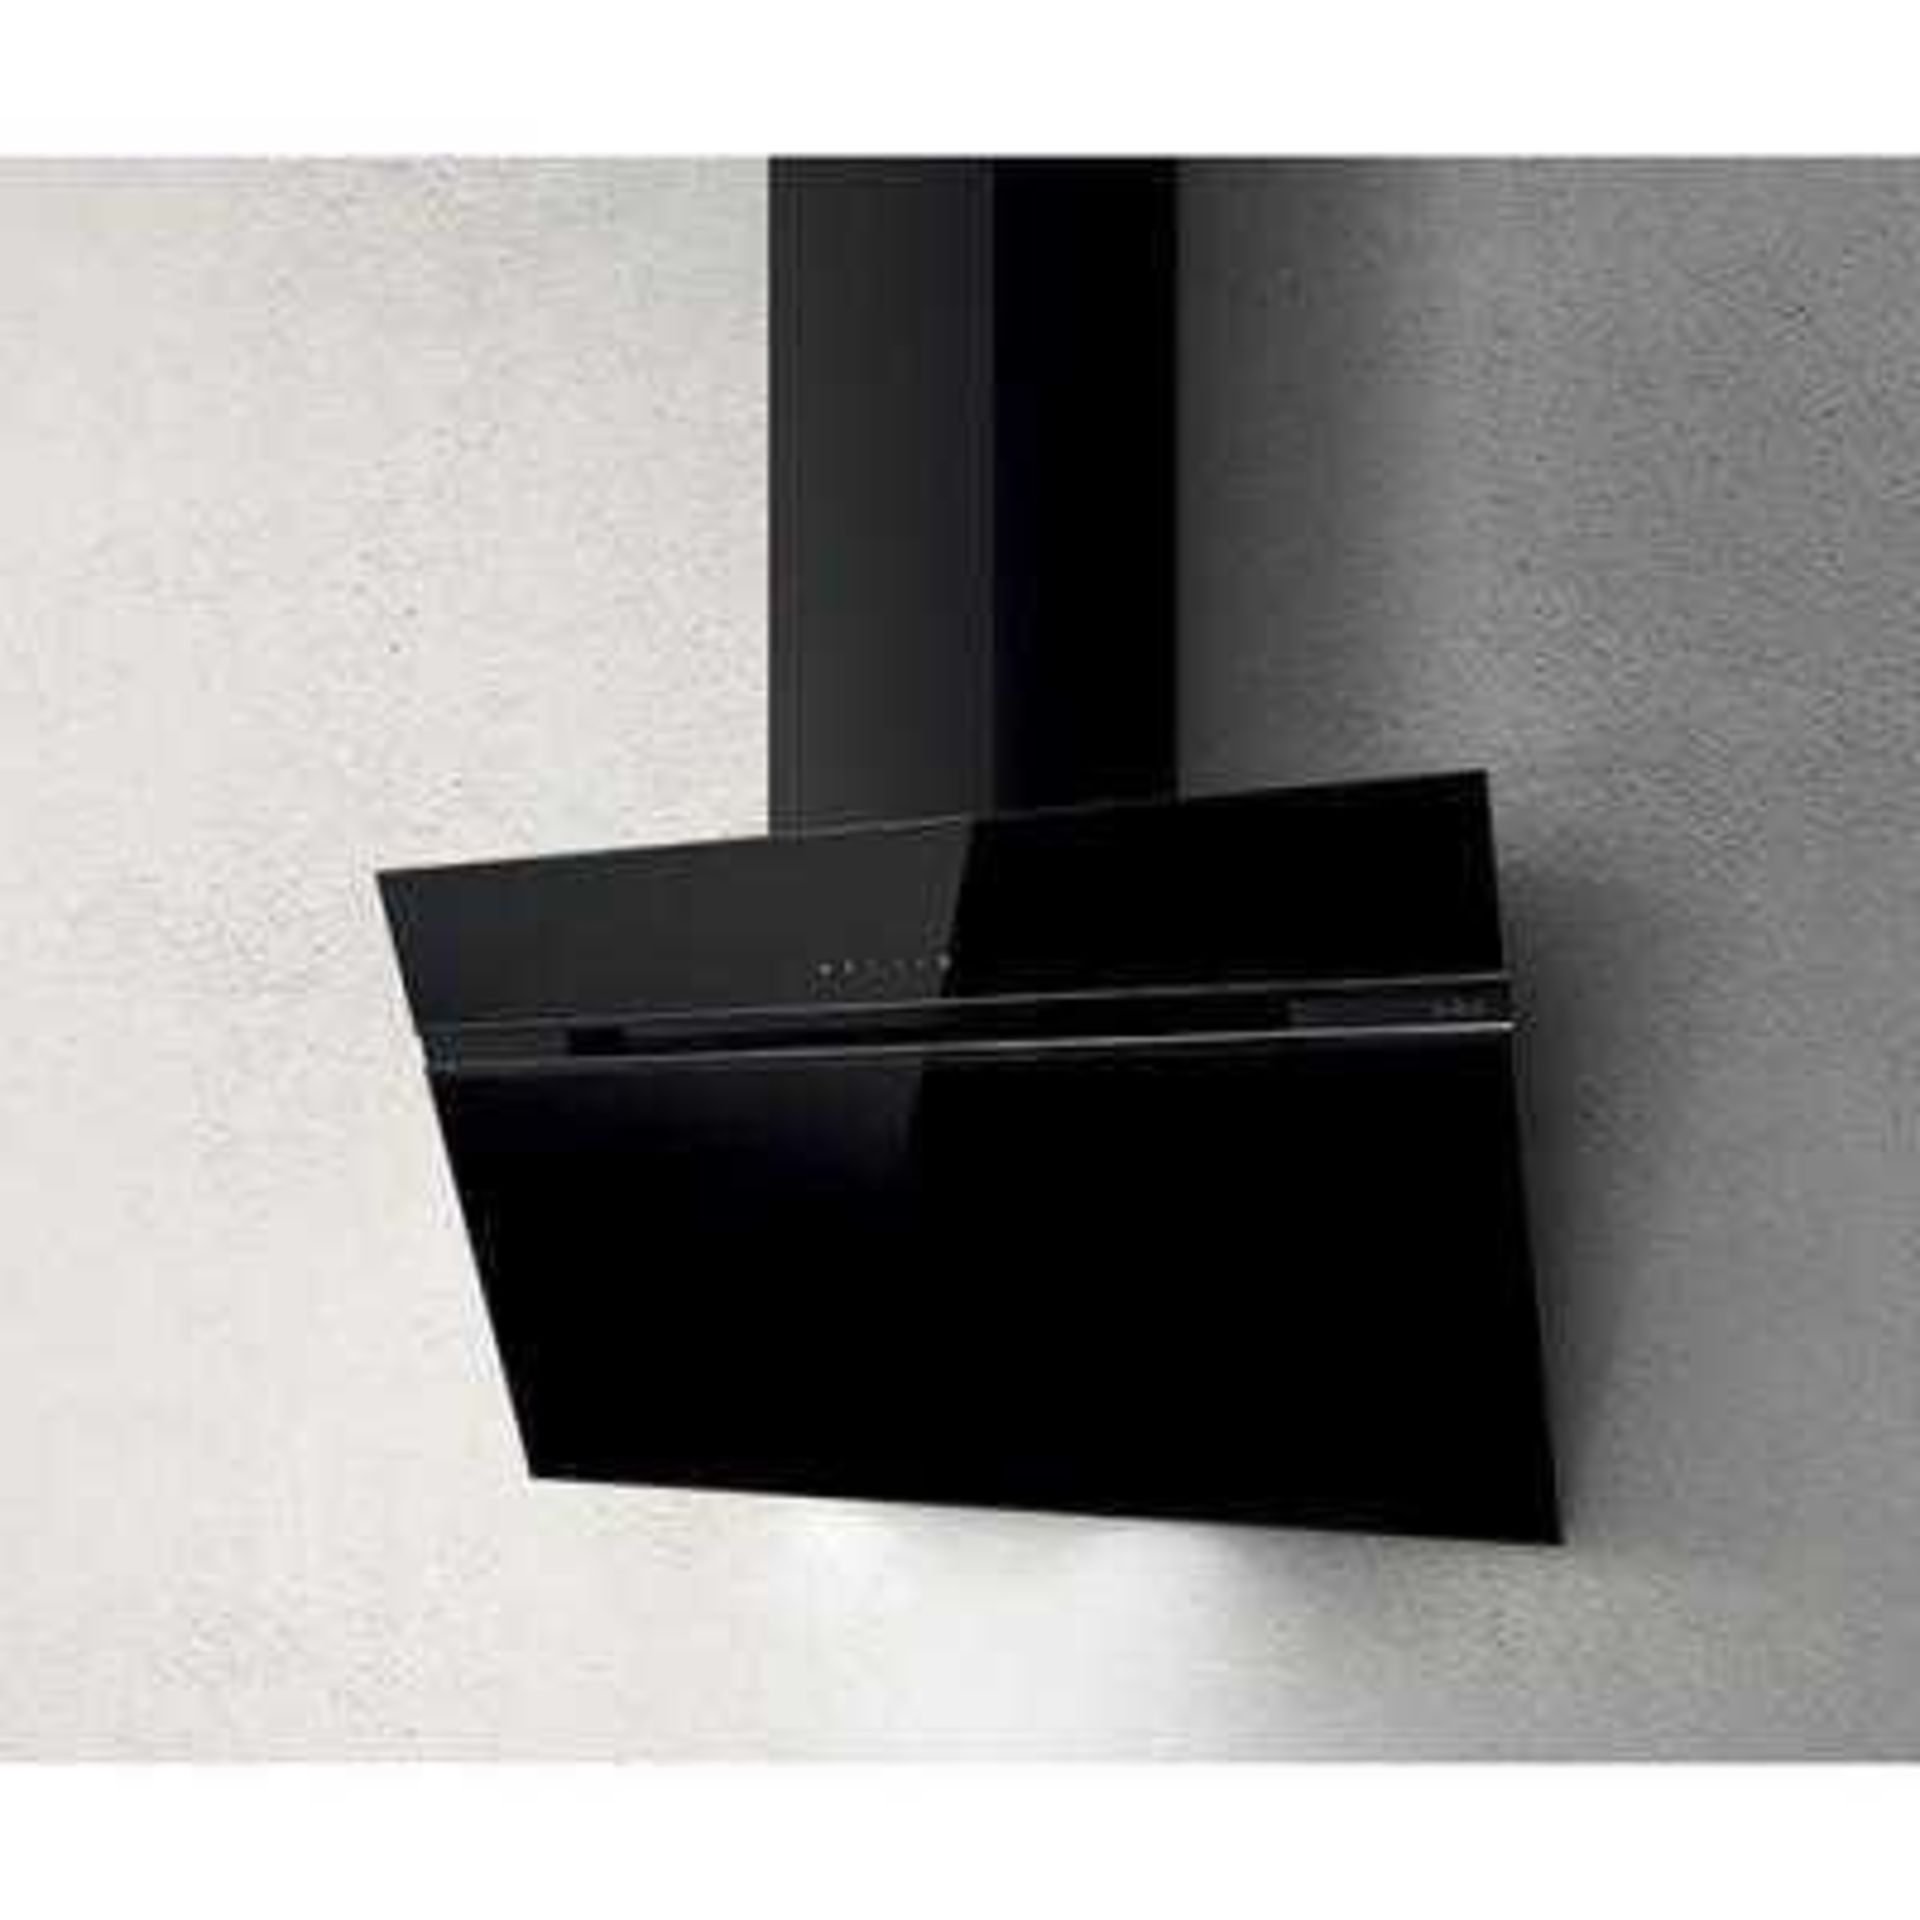 (Sk)RRP £400 Lot To Contain 1X Elica Stripe Prf0101143 Wall Mounted Cooker Hood - Black (Boxed)